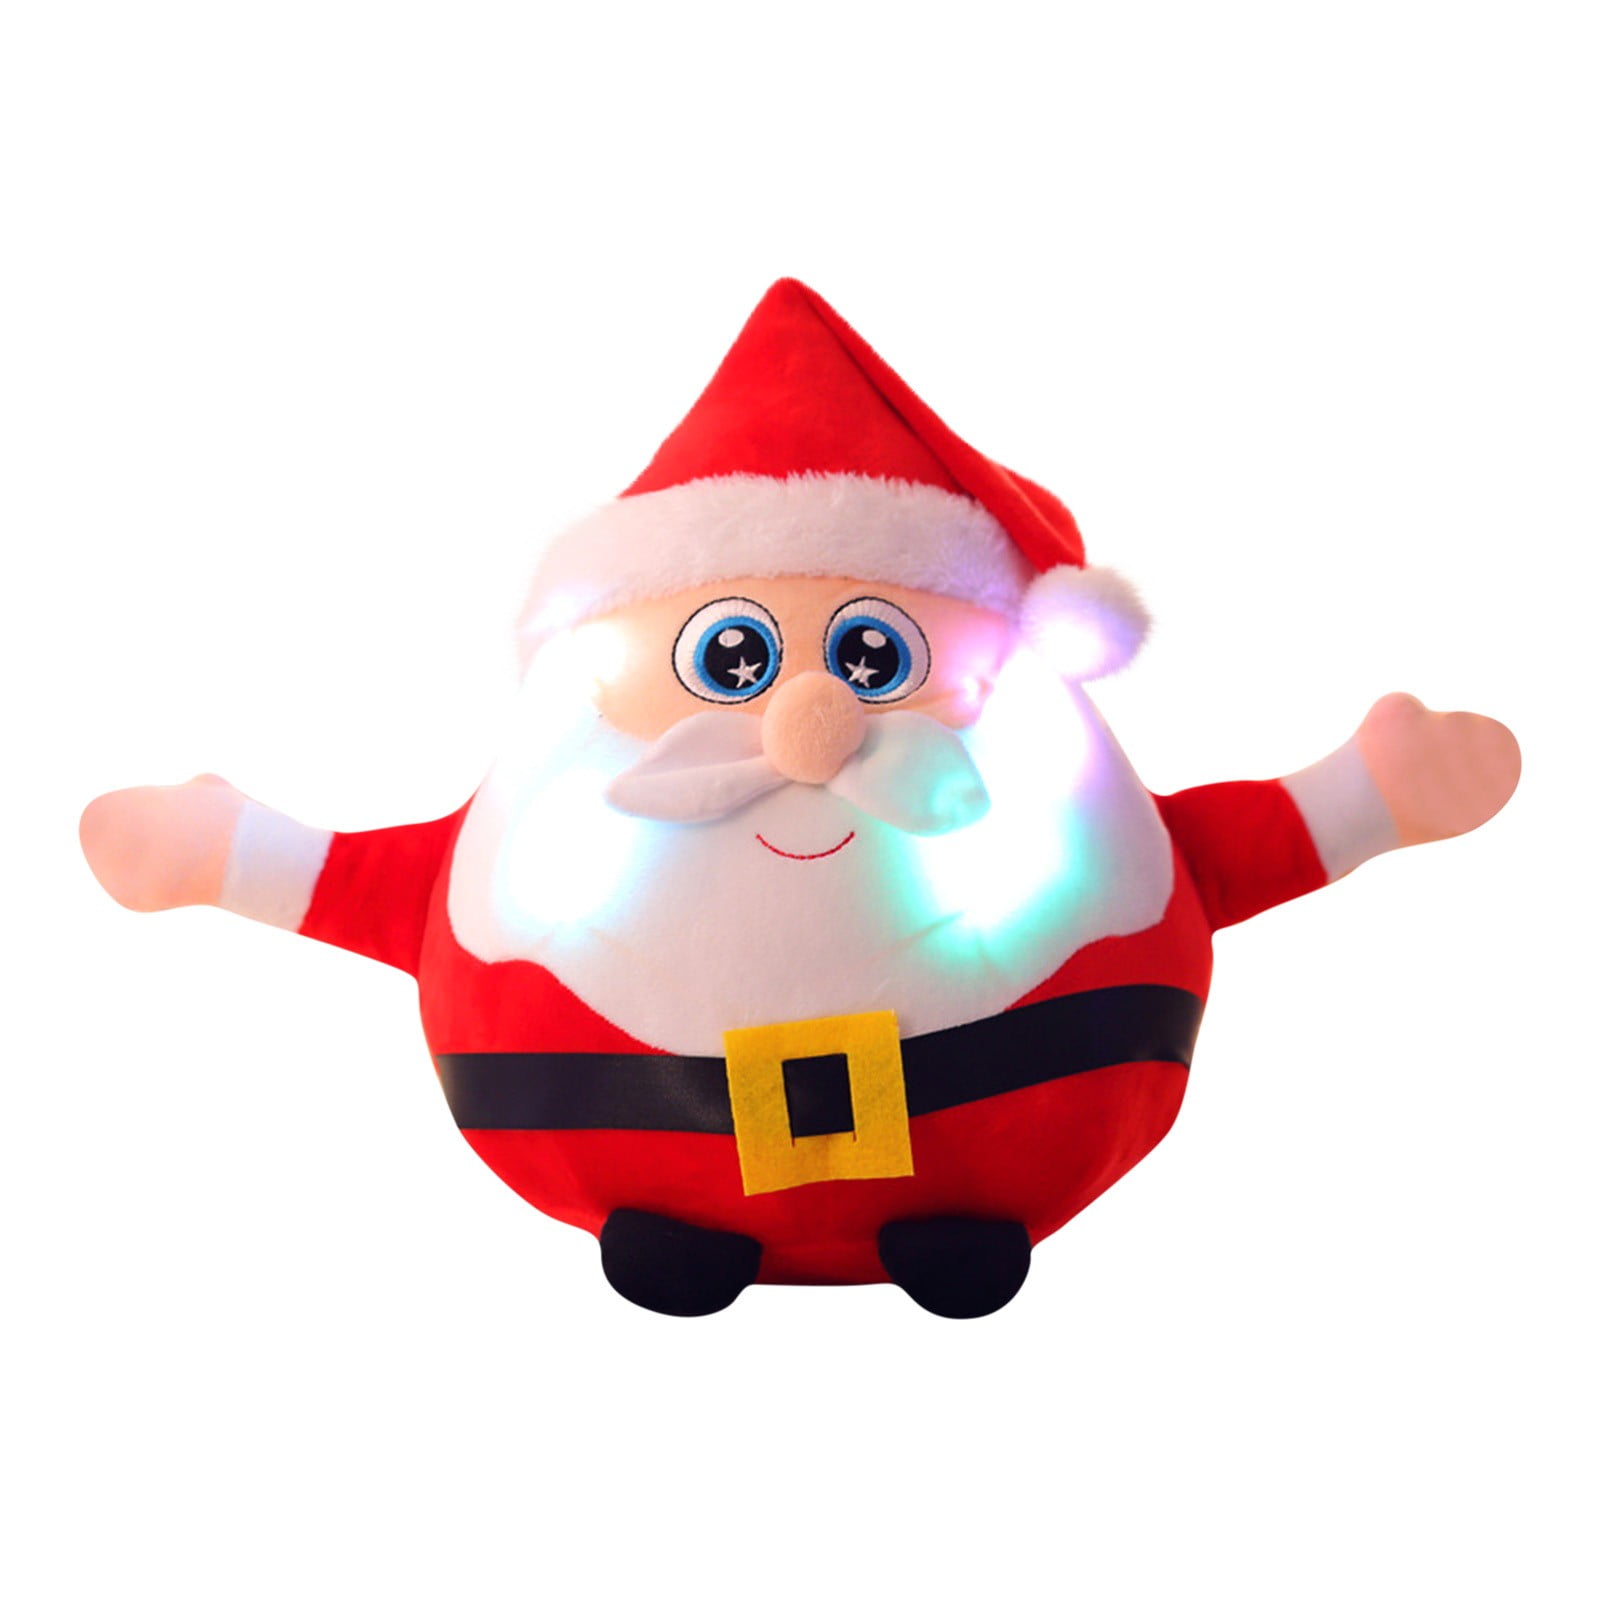 Claus Merry Christmas Decoration Animated Musical Santa Claus Elk Figurine LED Glowing Soft Plush Stuffed Doll Singing Christmas Puppet Toy Fireplace Home Desktop Decorations Ornament Kids 